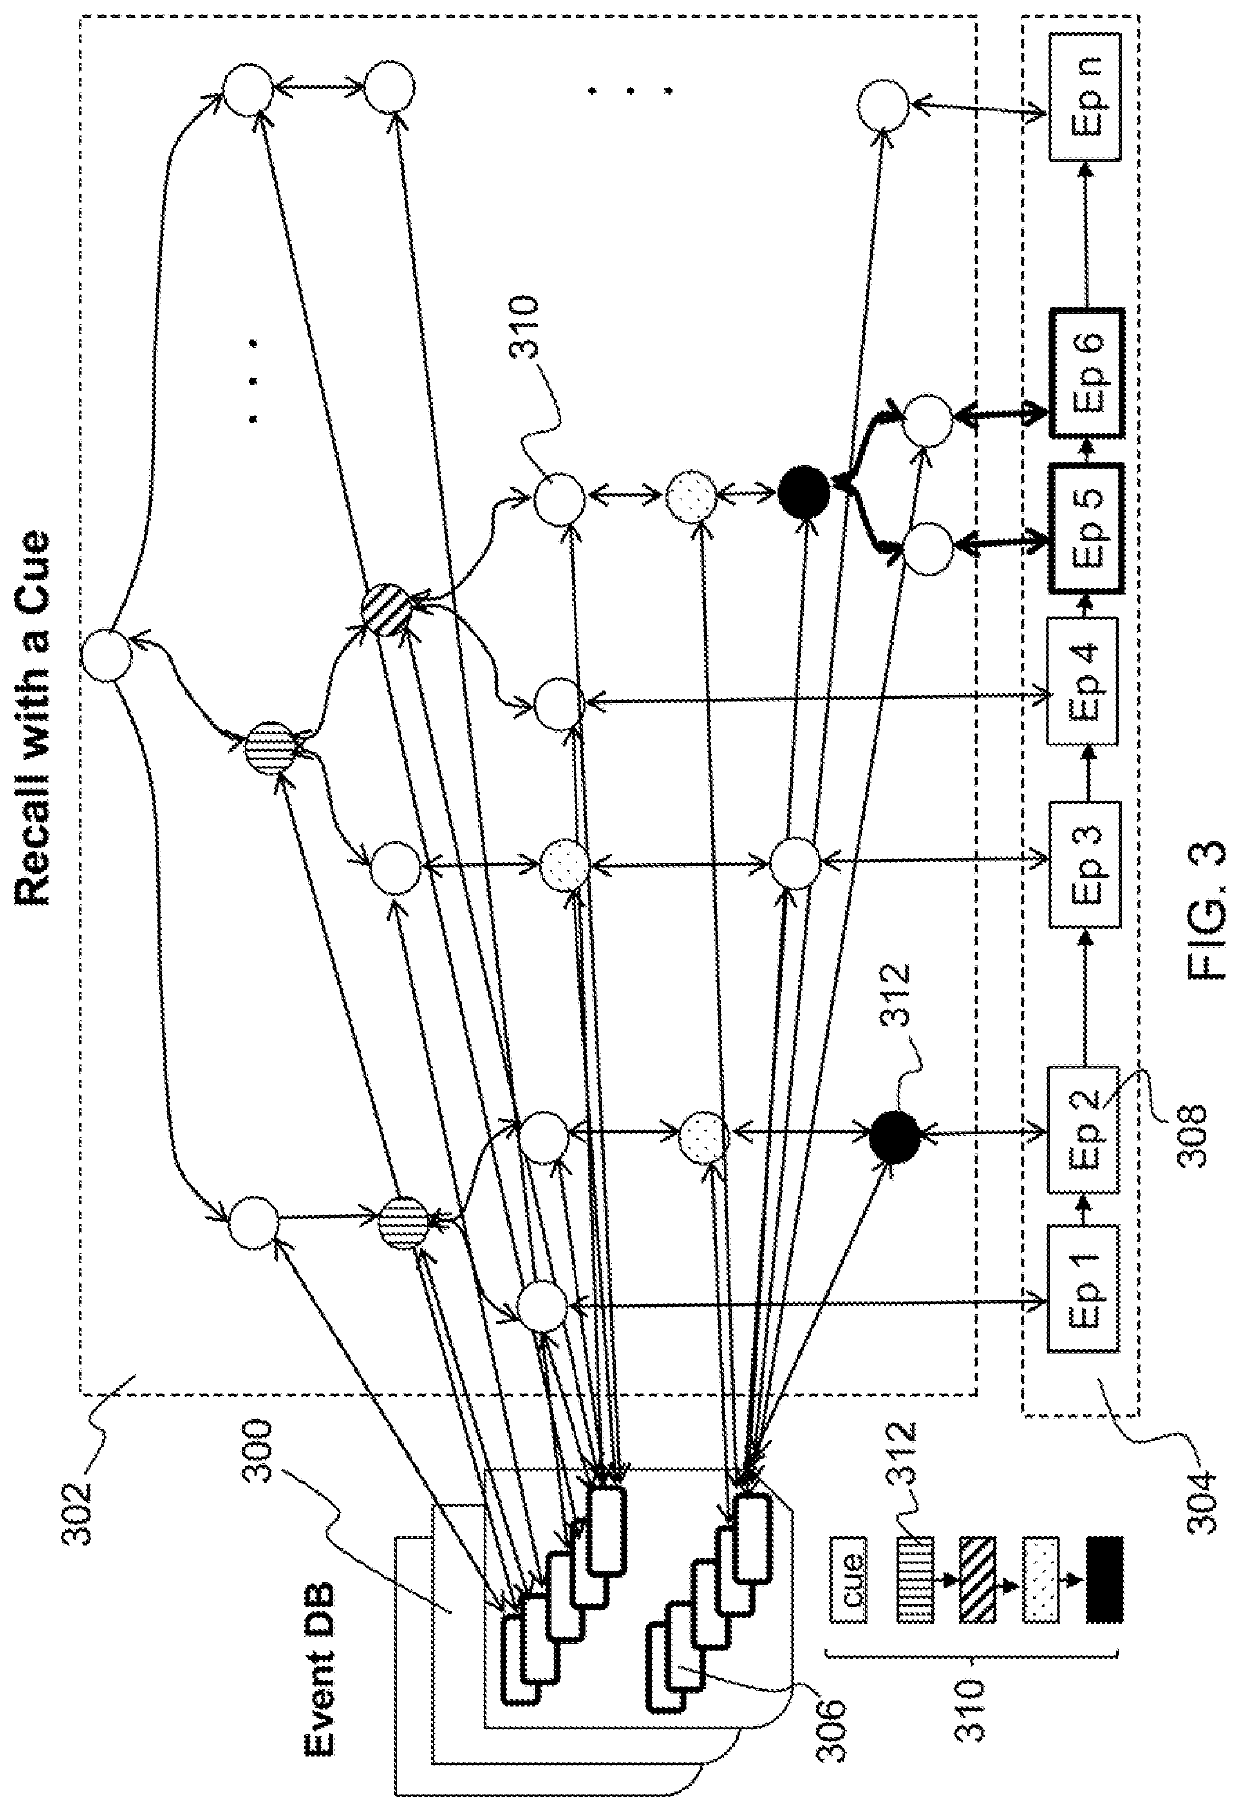 Scalable and efficient episodic memory in cognitive processing for automated systems